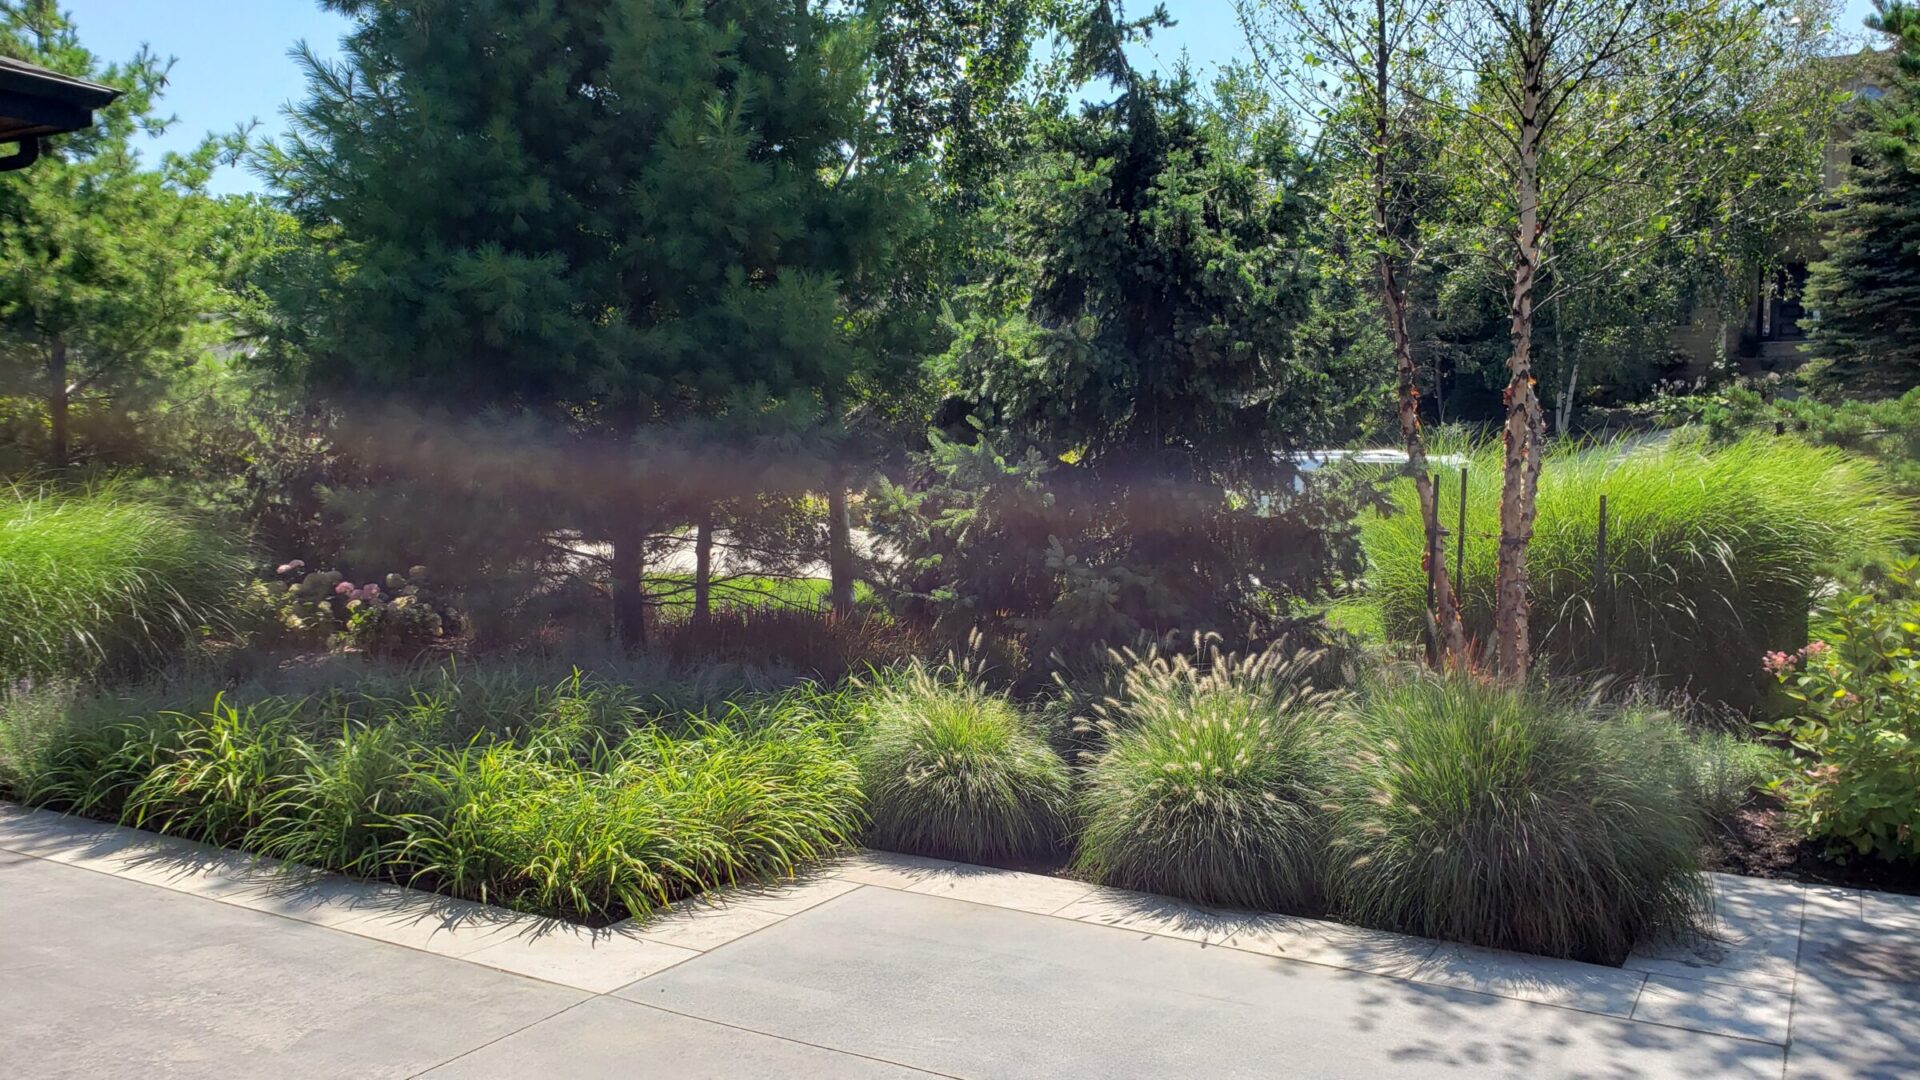 This image displays a landscaped garden with lush greenery, various grasses, and trees under a bright sky. A concrete pathway lies in the foreground.